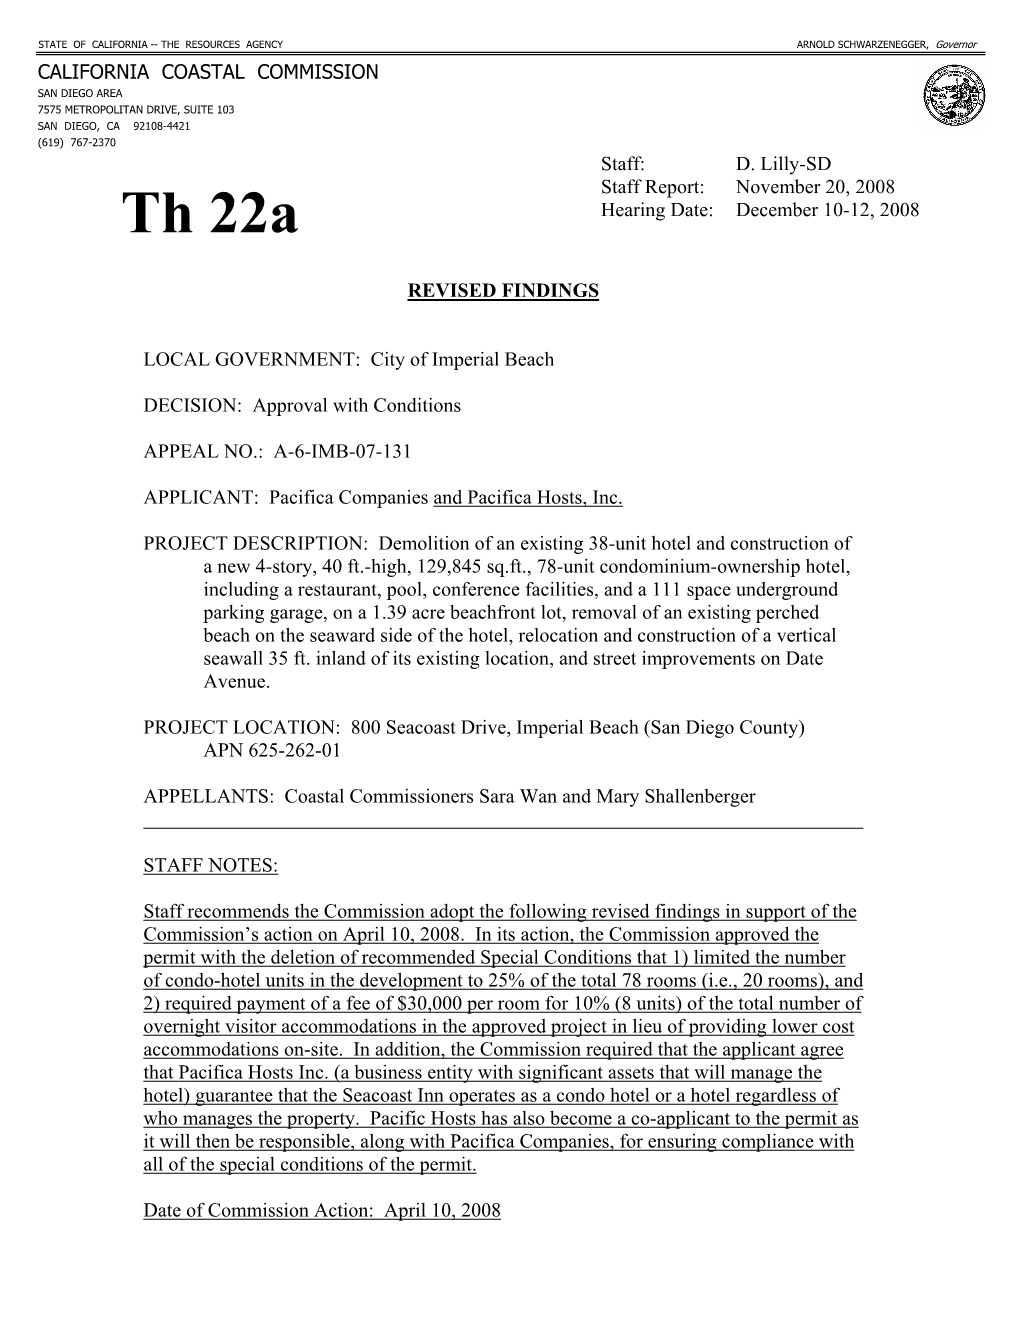 California Coastal Commission Staff Report and Recommendation Regarding Appeal No. A-6-IMB-07-131(Pacifica Co., Imperial Beach)